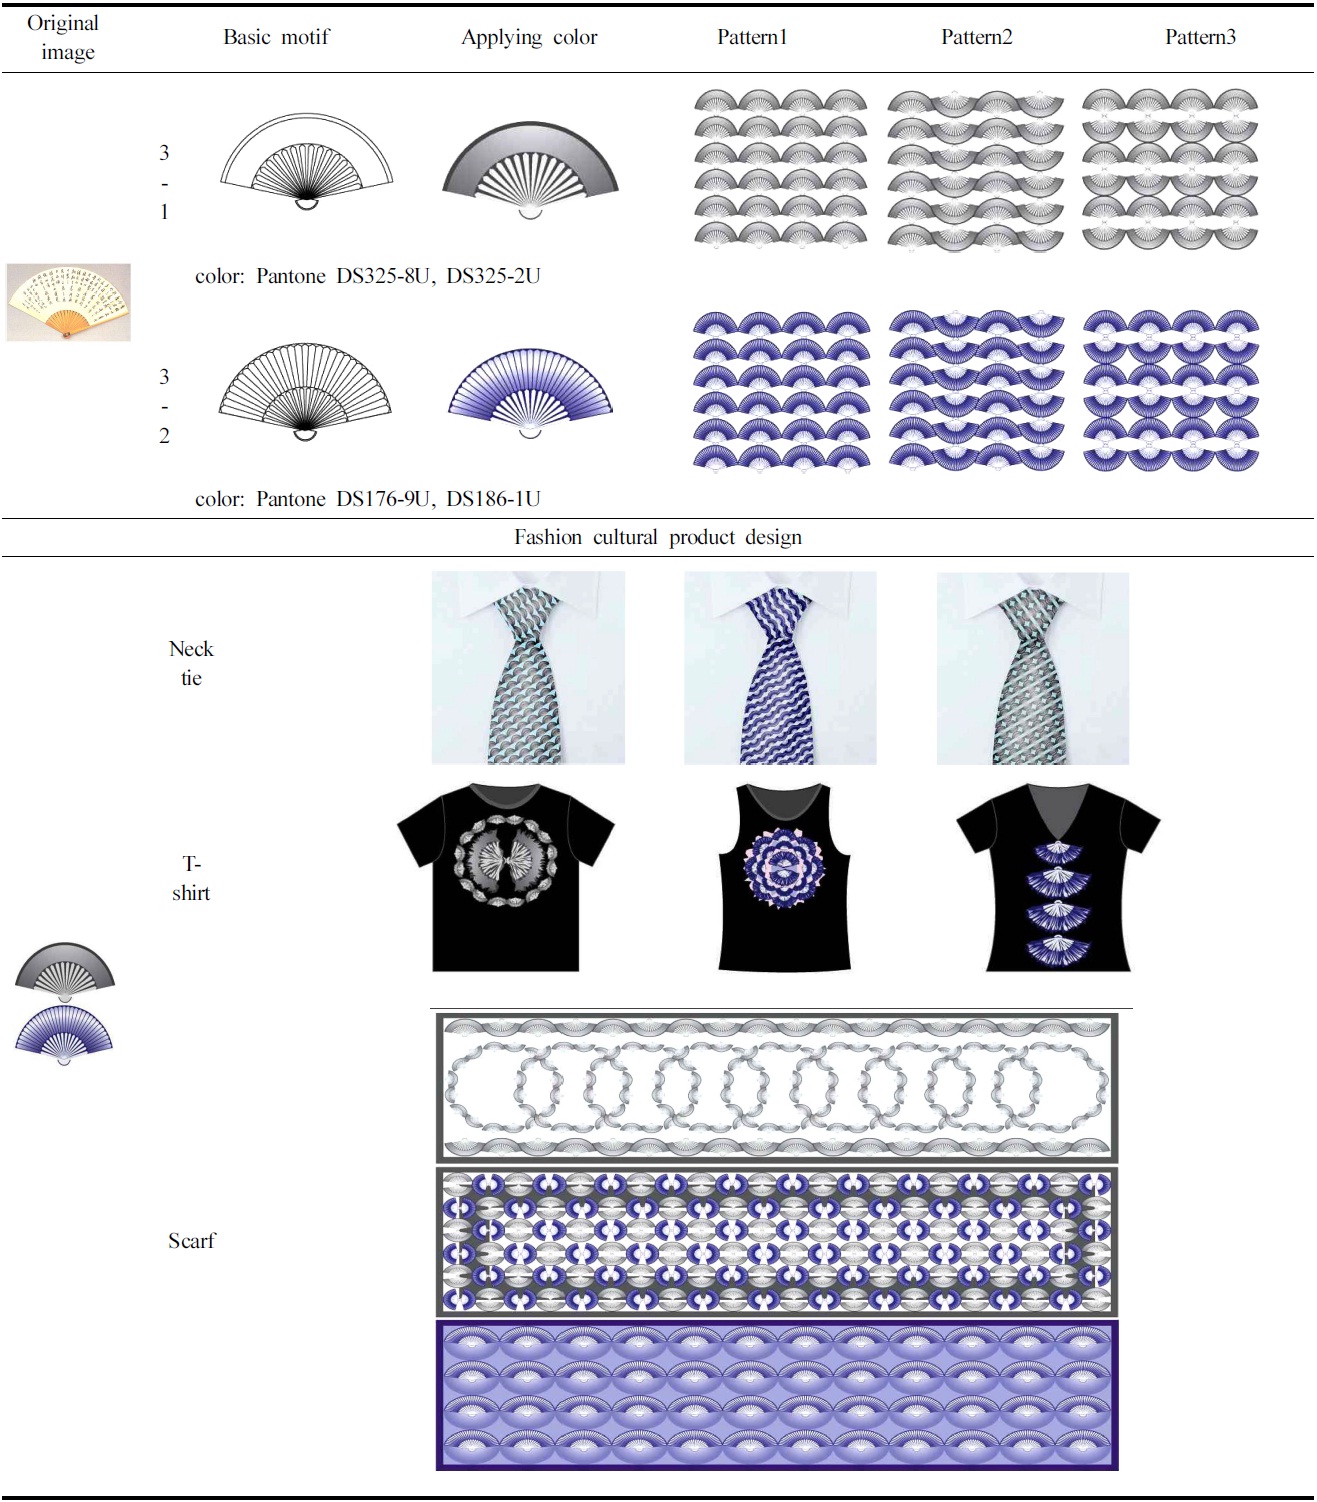 Development of motif design 4 and fashion cultural product design